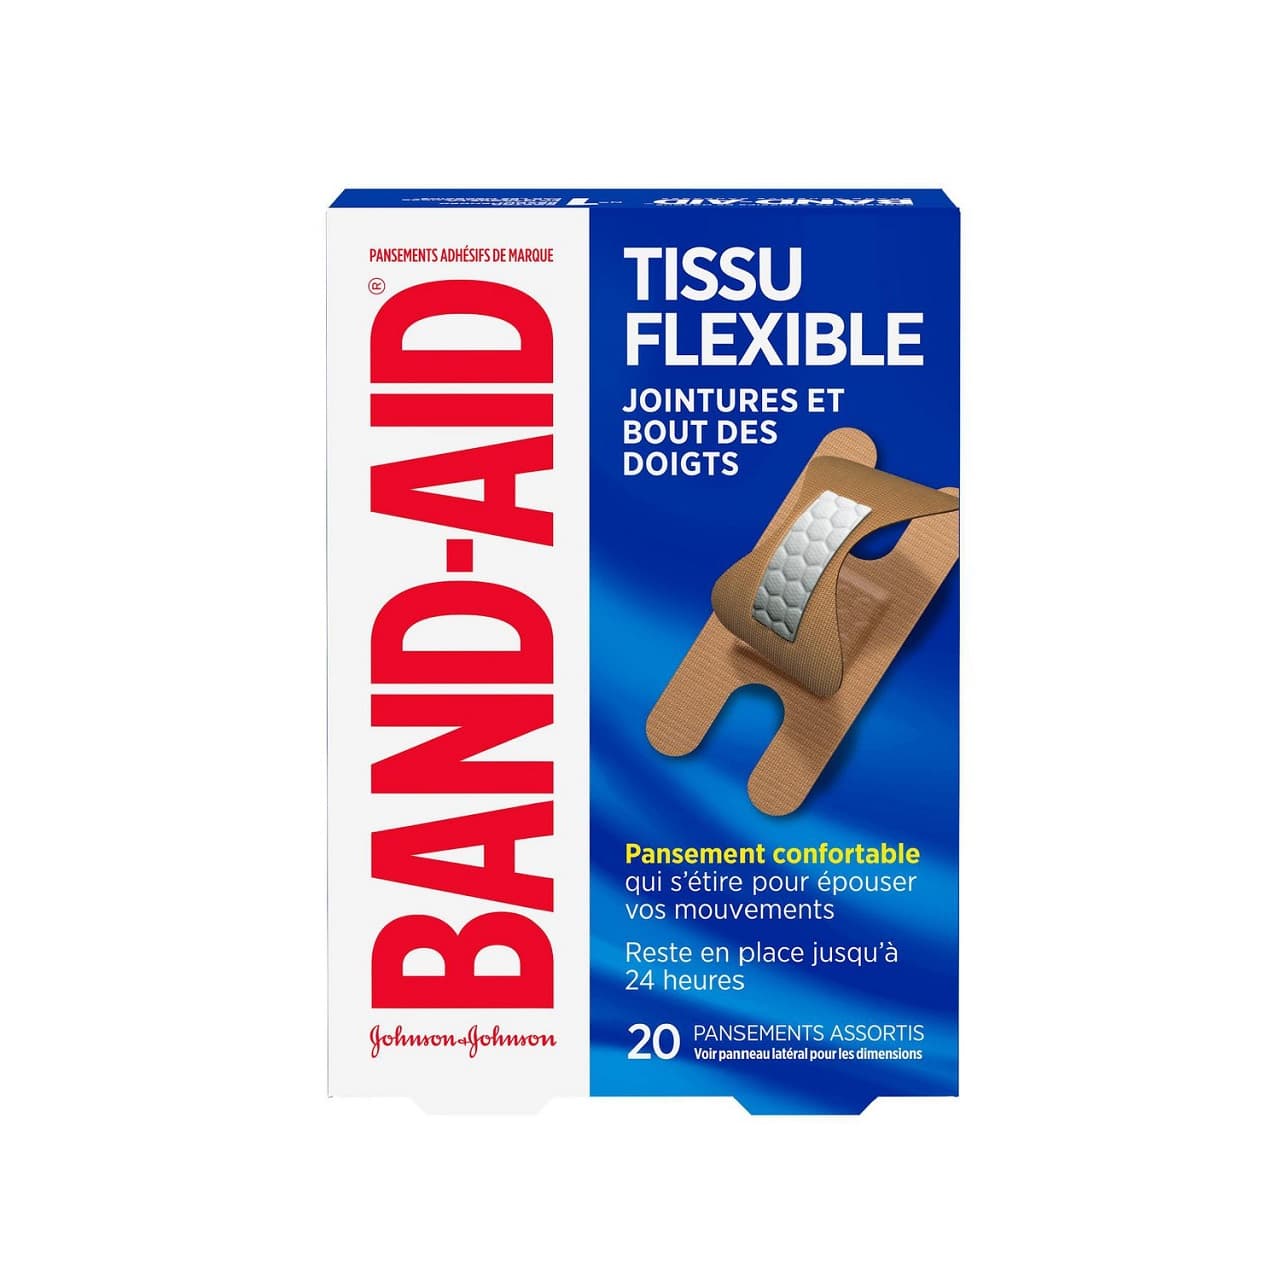 Product label for Band-Aid Flexible Fabric Knuckle & Fingertip (20 bandages) in French